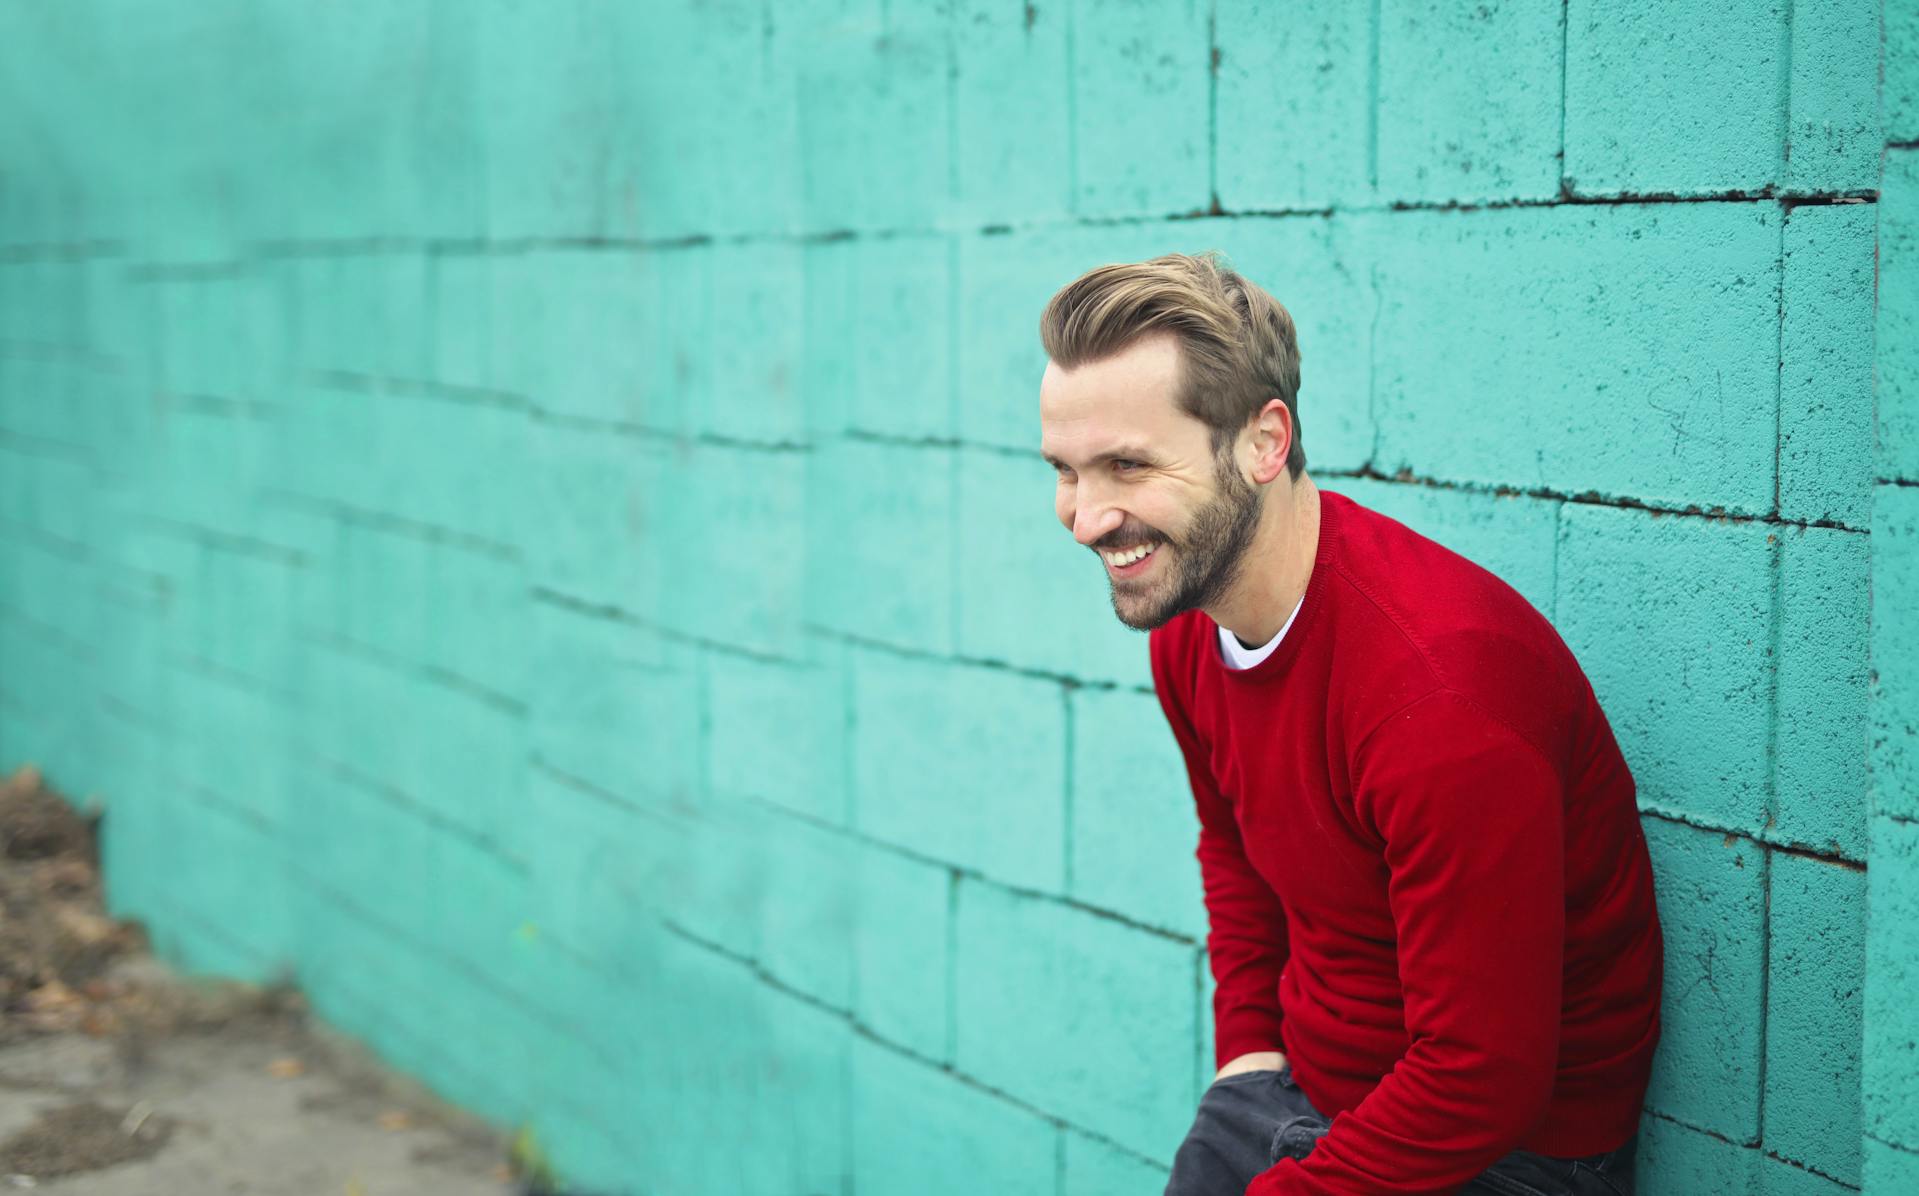 A smiling man leaning against a wall | Source: Pexels